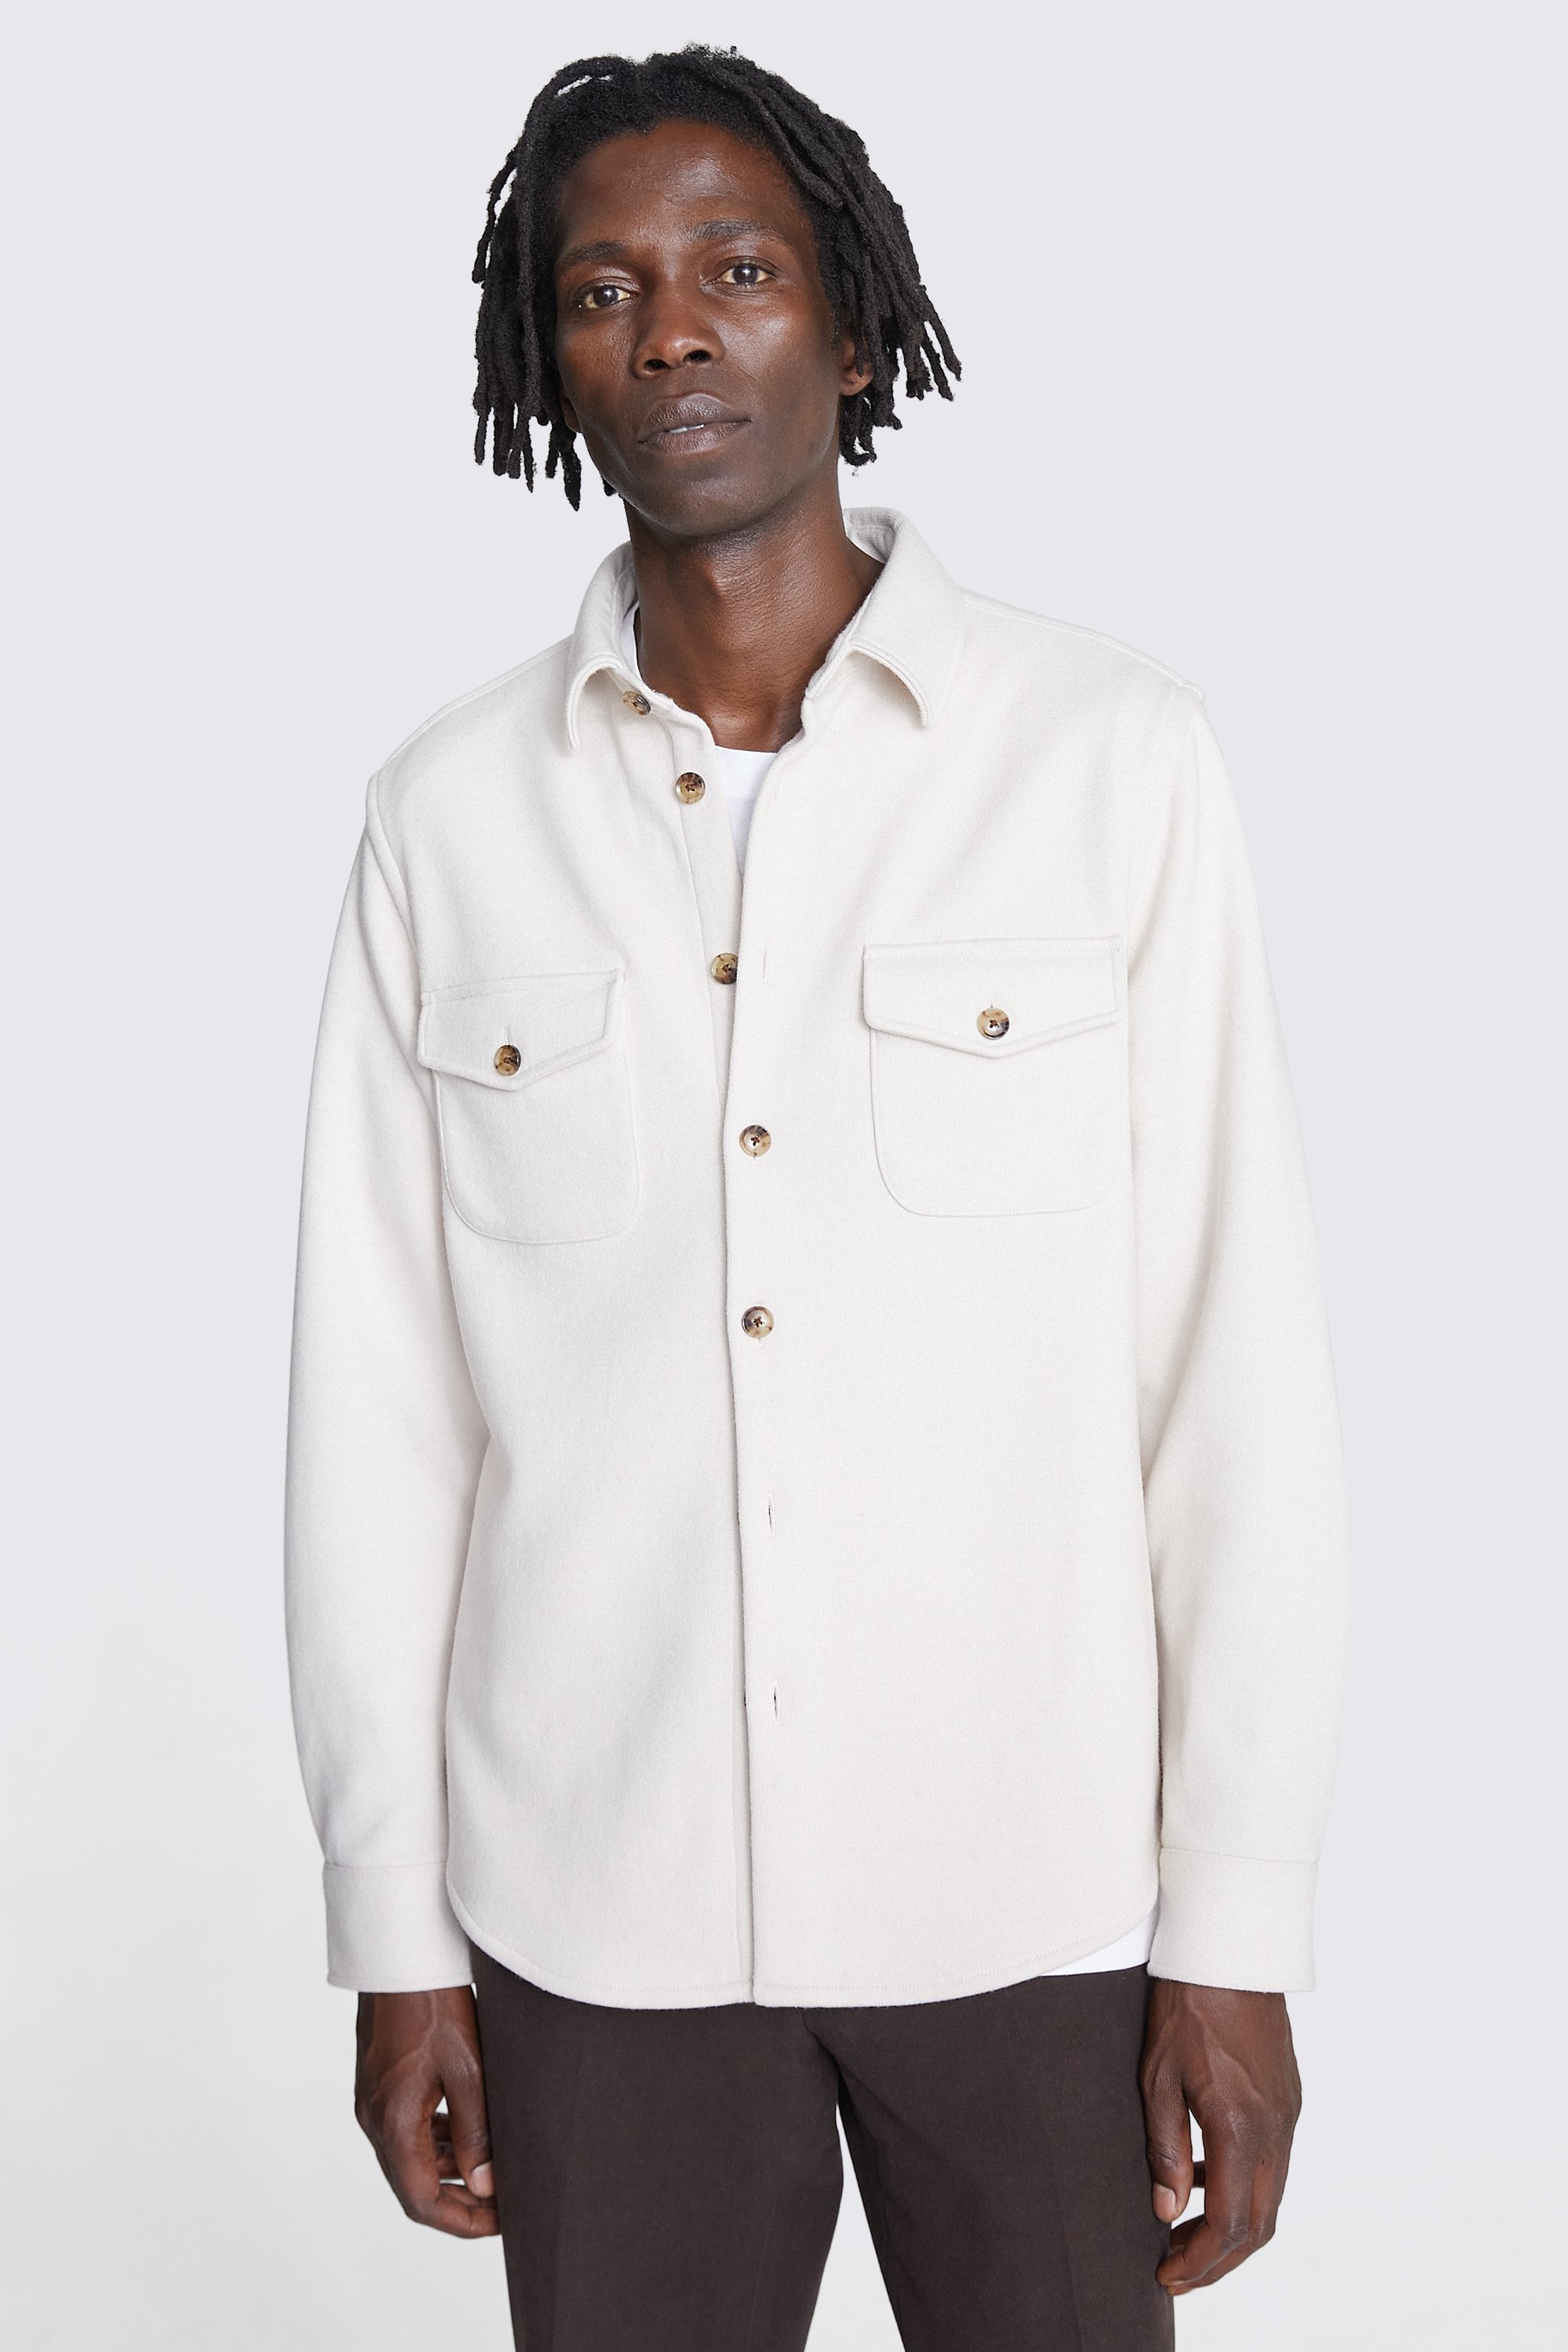 Off White Knitted Overshirt | Buy Online at Moss